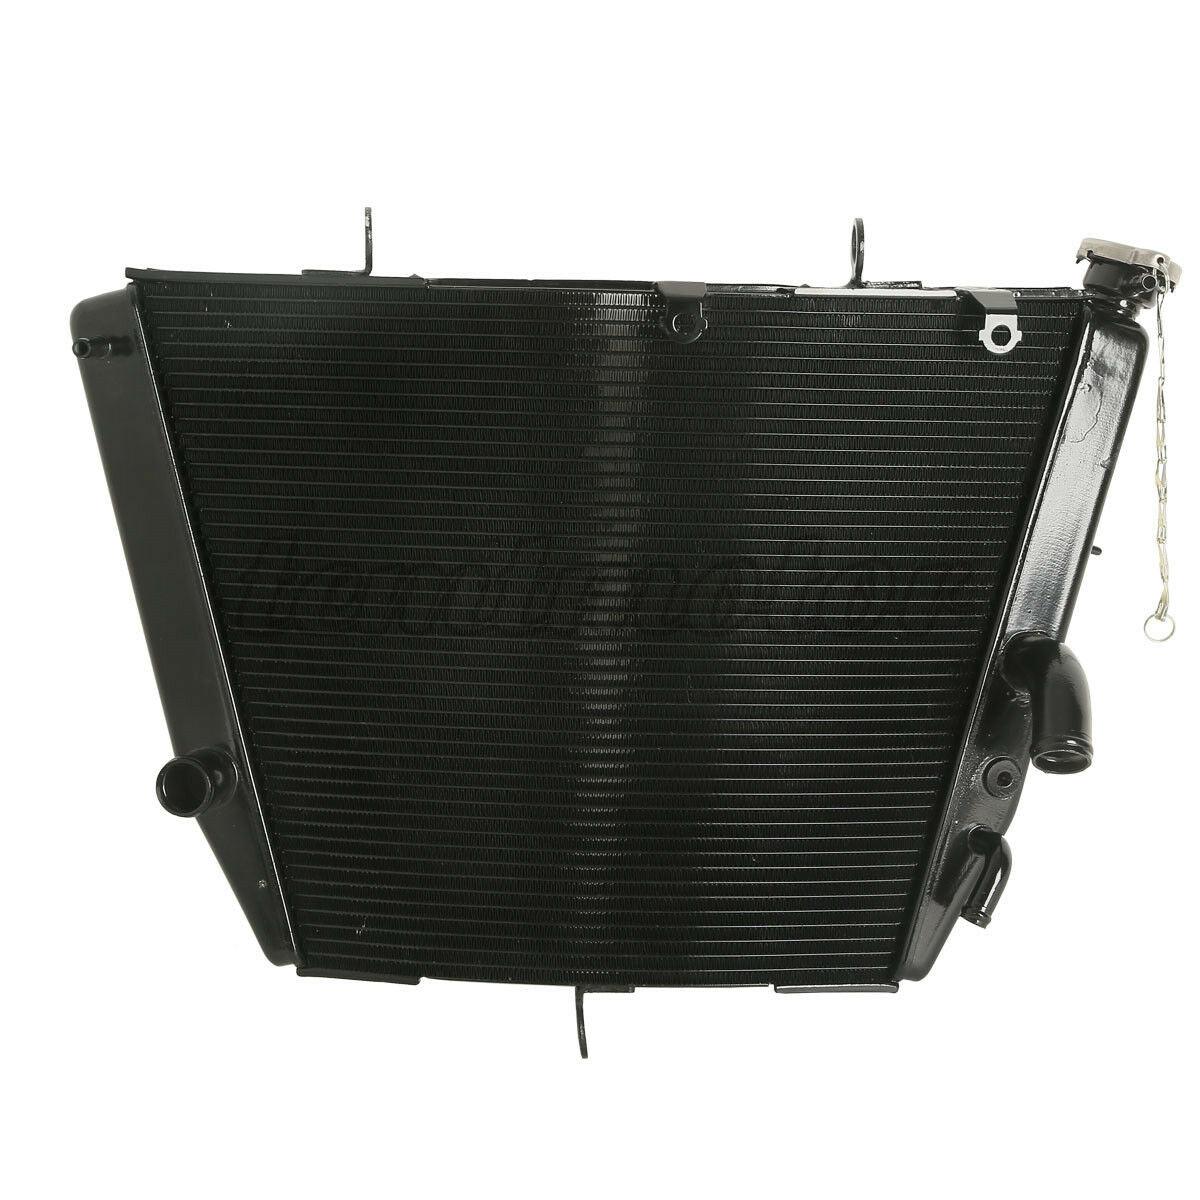 0Black Radiator Cooler Cooling For Suzuki GSXR600 750 GSX-R600 750 2006-2010 USA - Moto Life Products